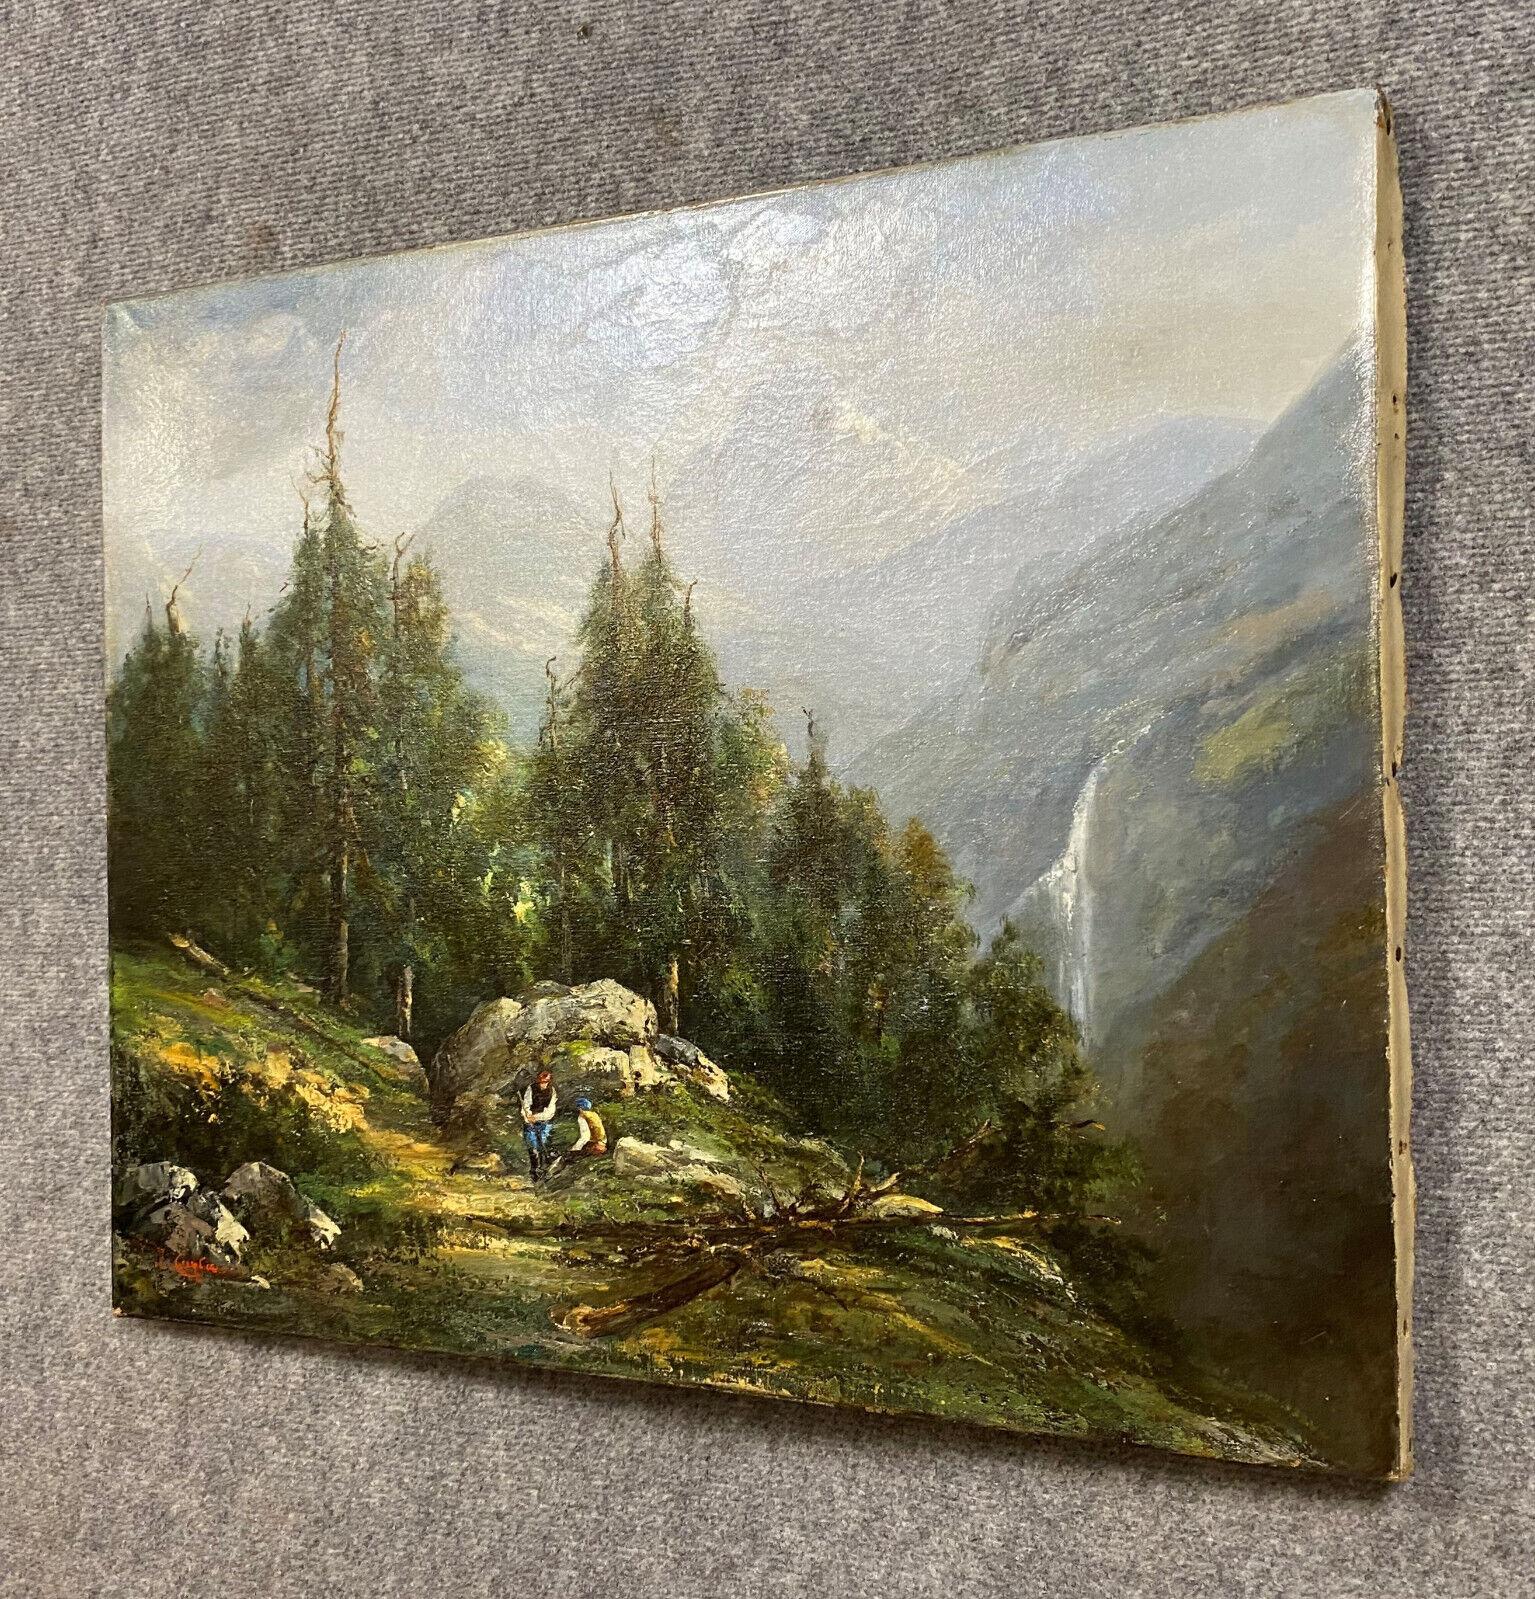 Transport yourself to the serene beauty of the Swiss mountains with this captivating oil painting on canvas, created by an artist from the Swiss School circa 1880-1900. Featuring a lively mountain landscape, this artwork showcases vibrant colors and